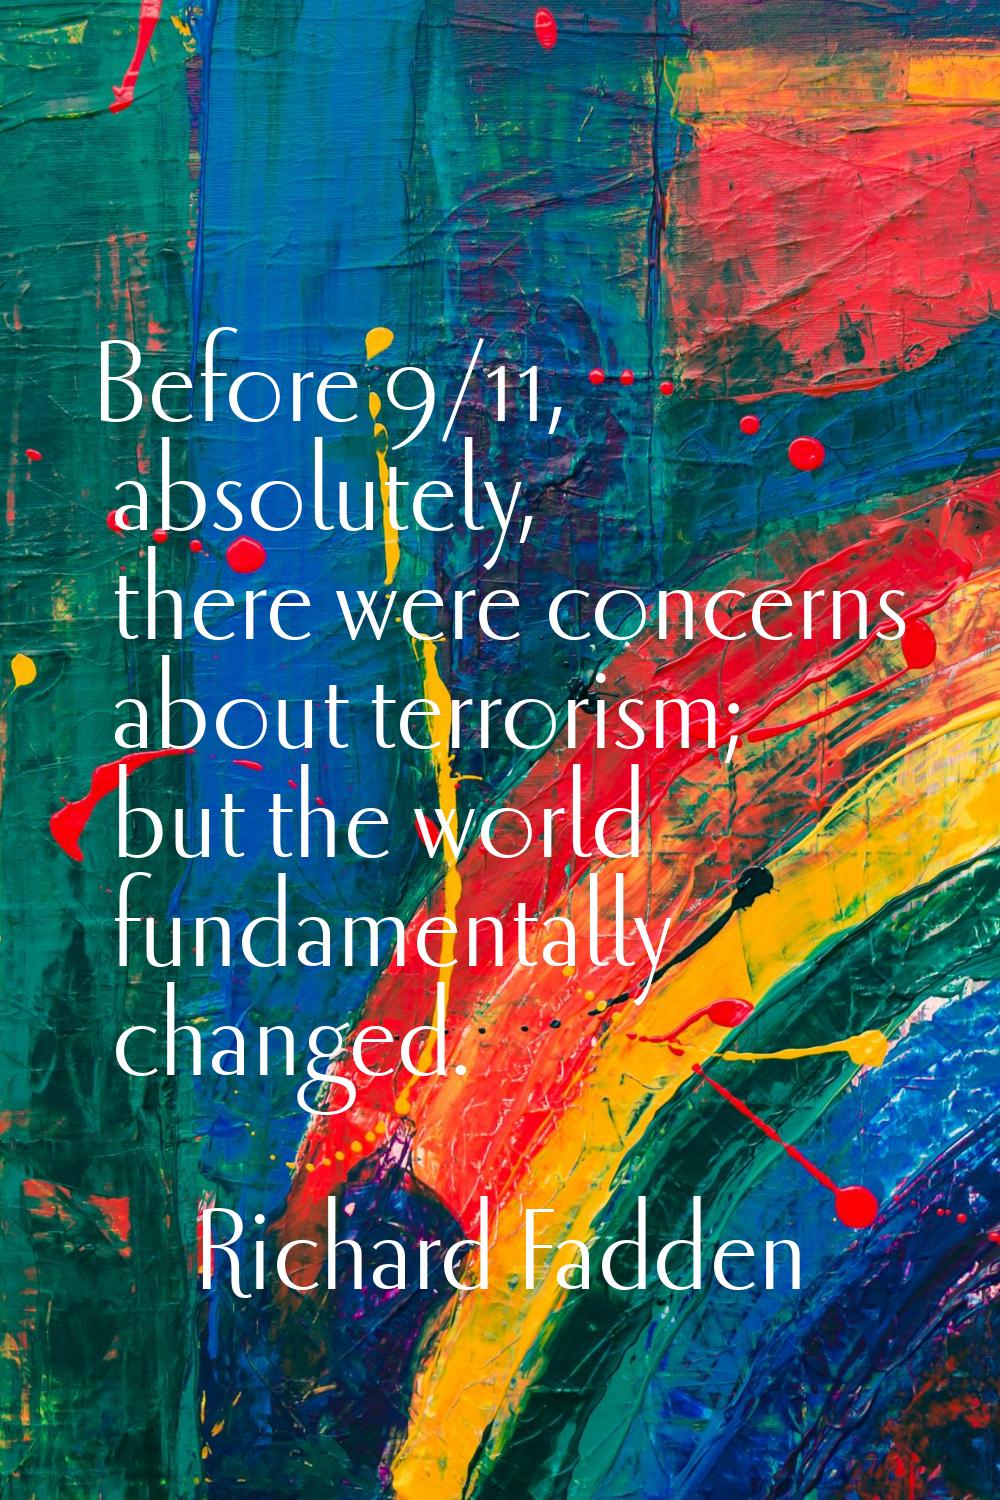 Before 9/11, absolutely, there were concerns about terrorism; but the world fundamentally changed.